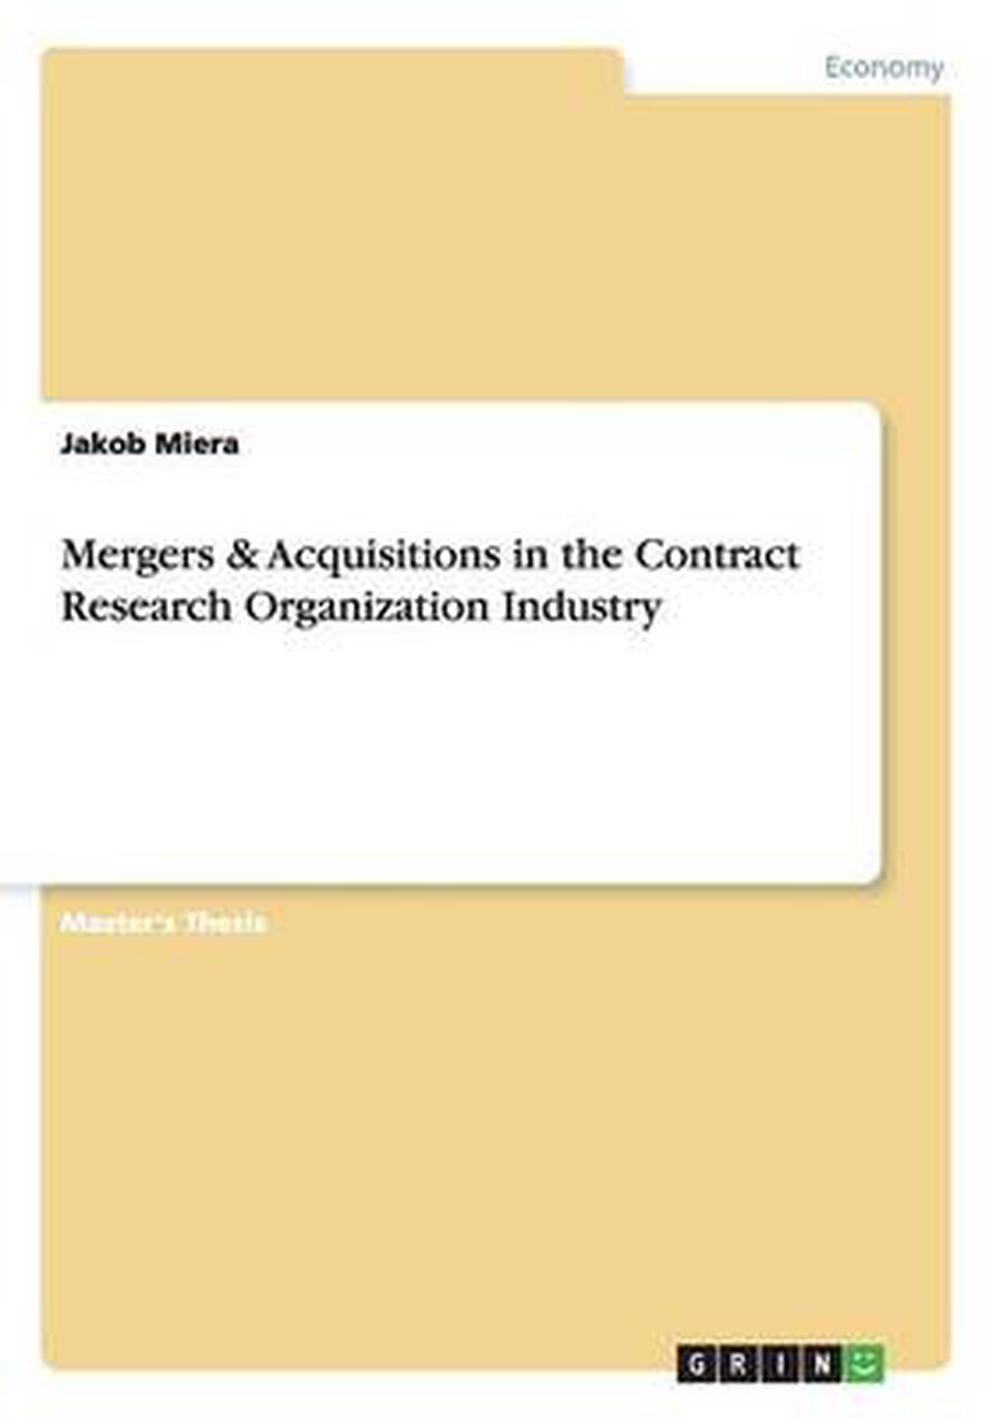 masters dissertation services mergers and acquisitions